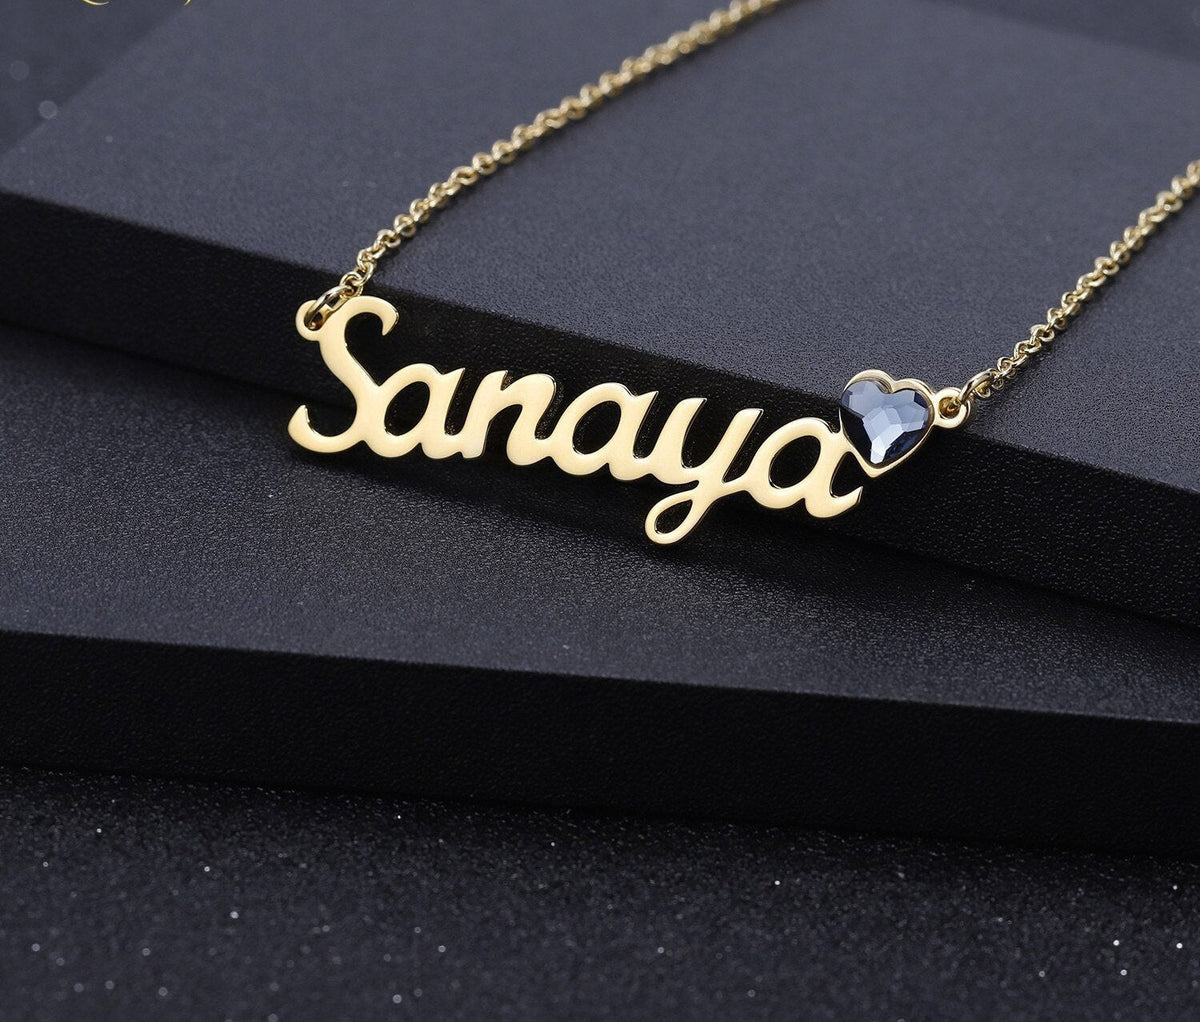 Personalized Name Necklace with Heart Birthstone | Customized Necklace | Dainty Name Necklace | Stainless steel Name Necklace | Jewelry Gift - BonoGifts